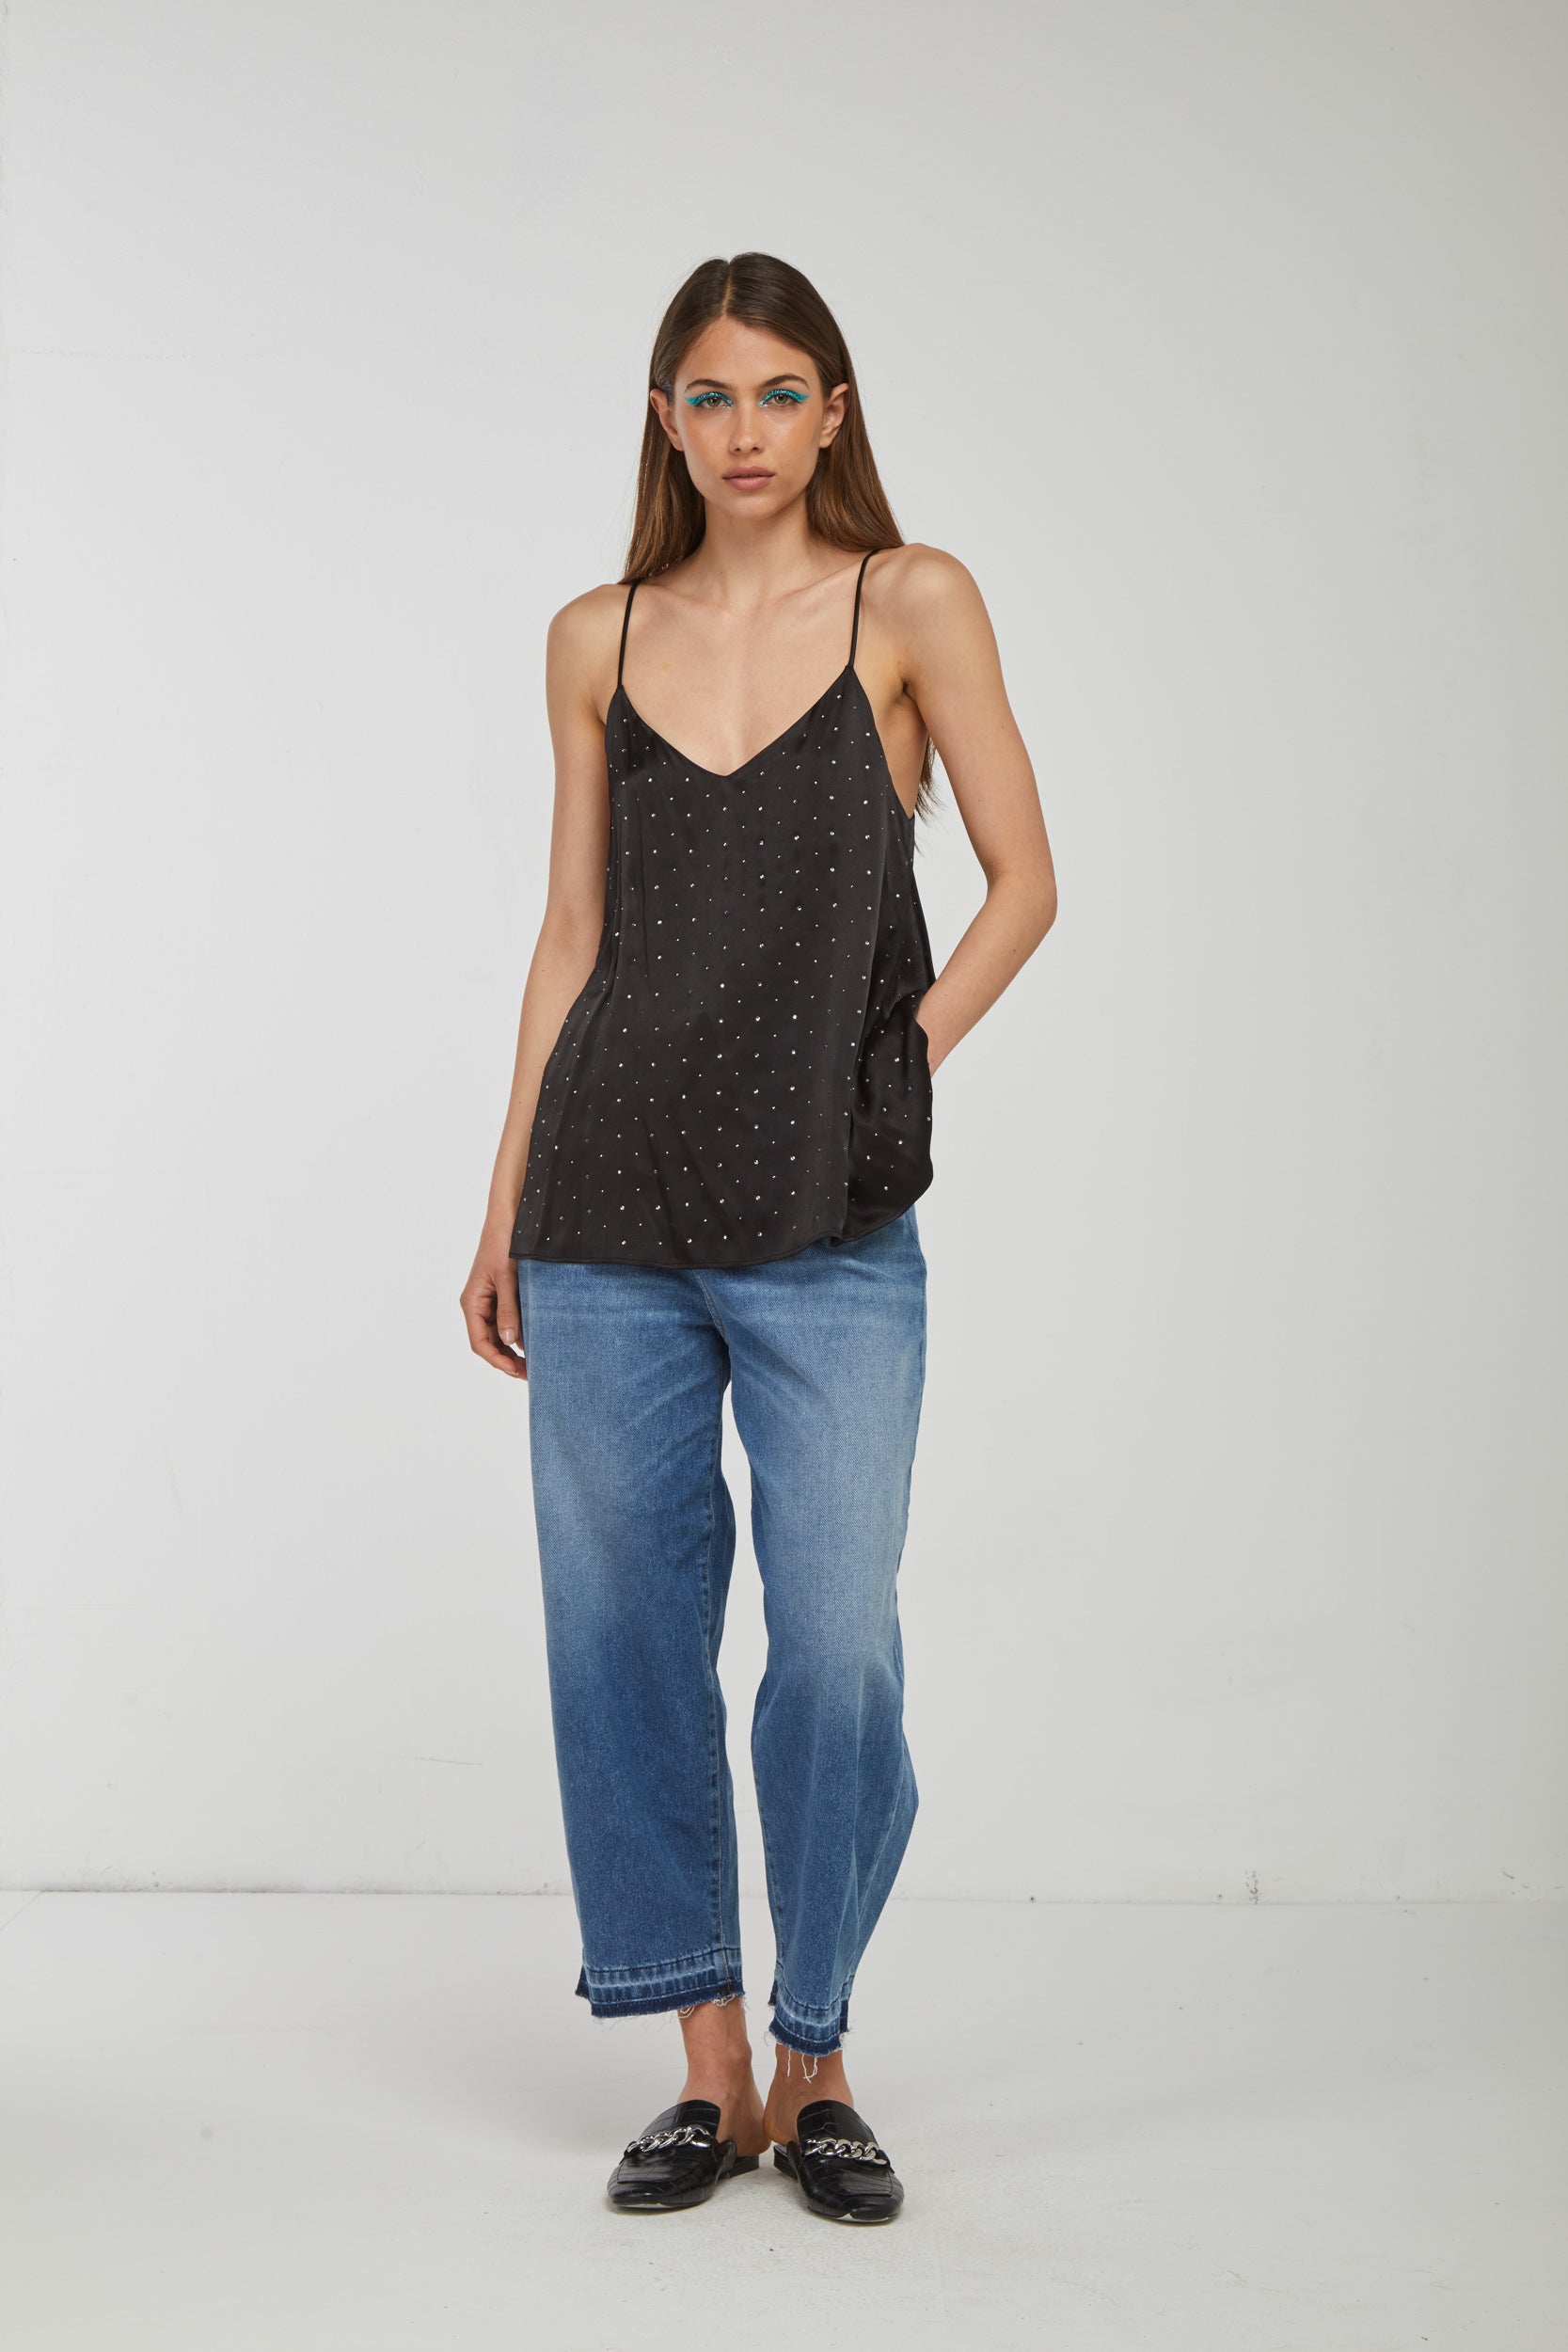 OTTOD'AME Top Black Sequined